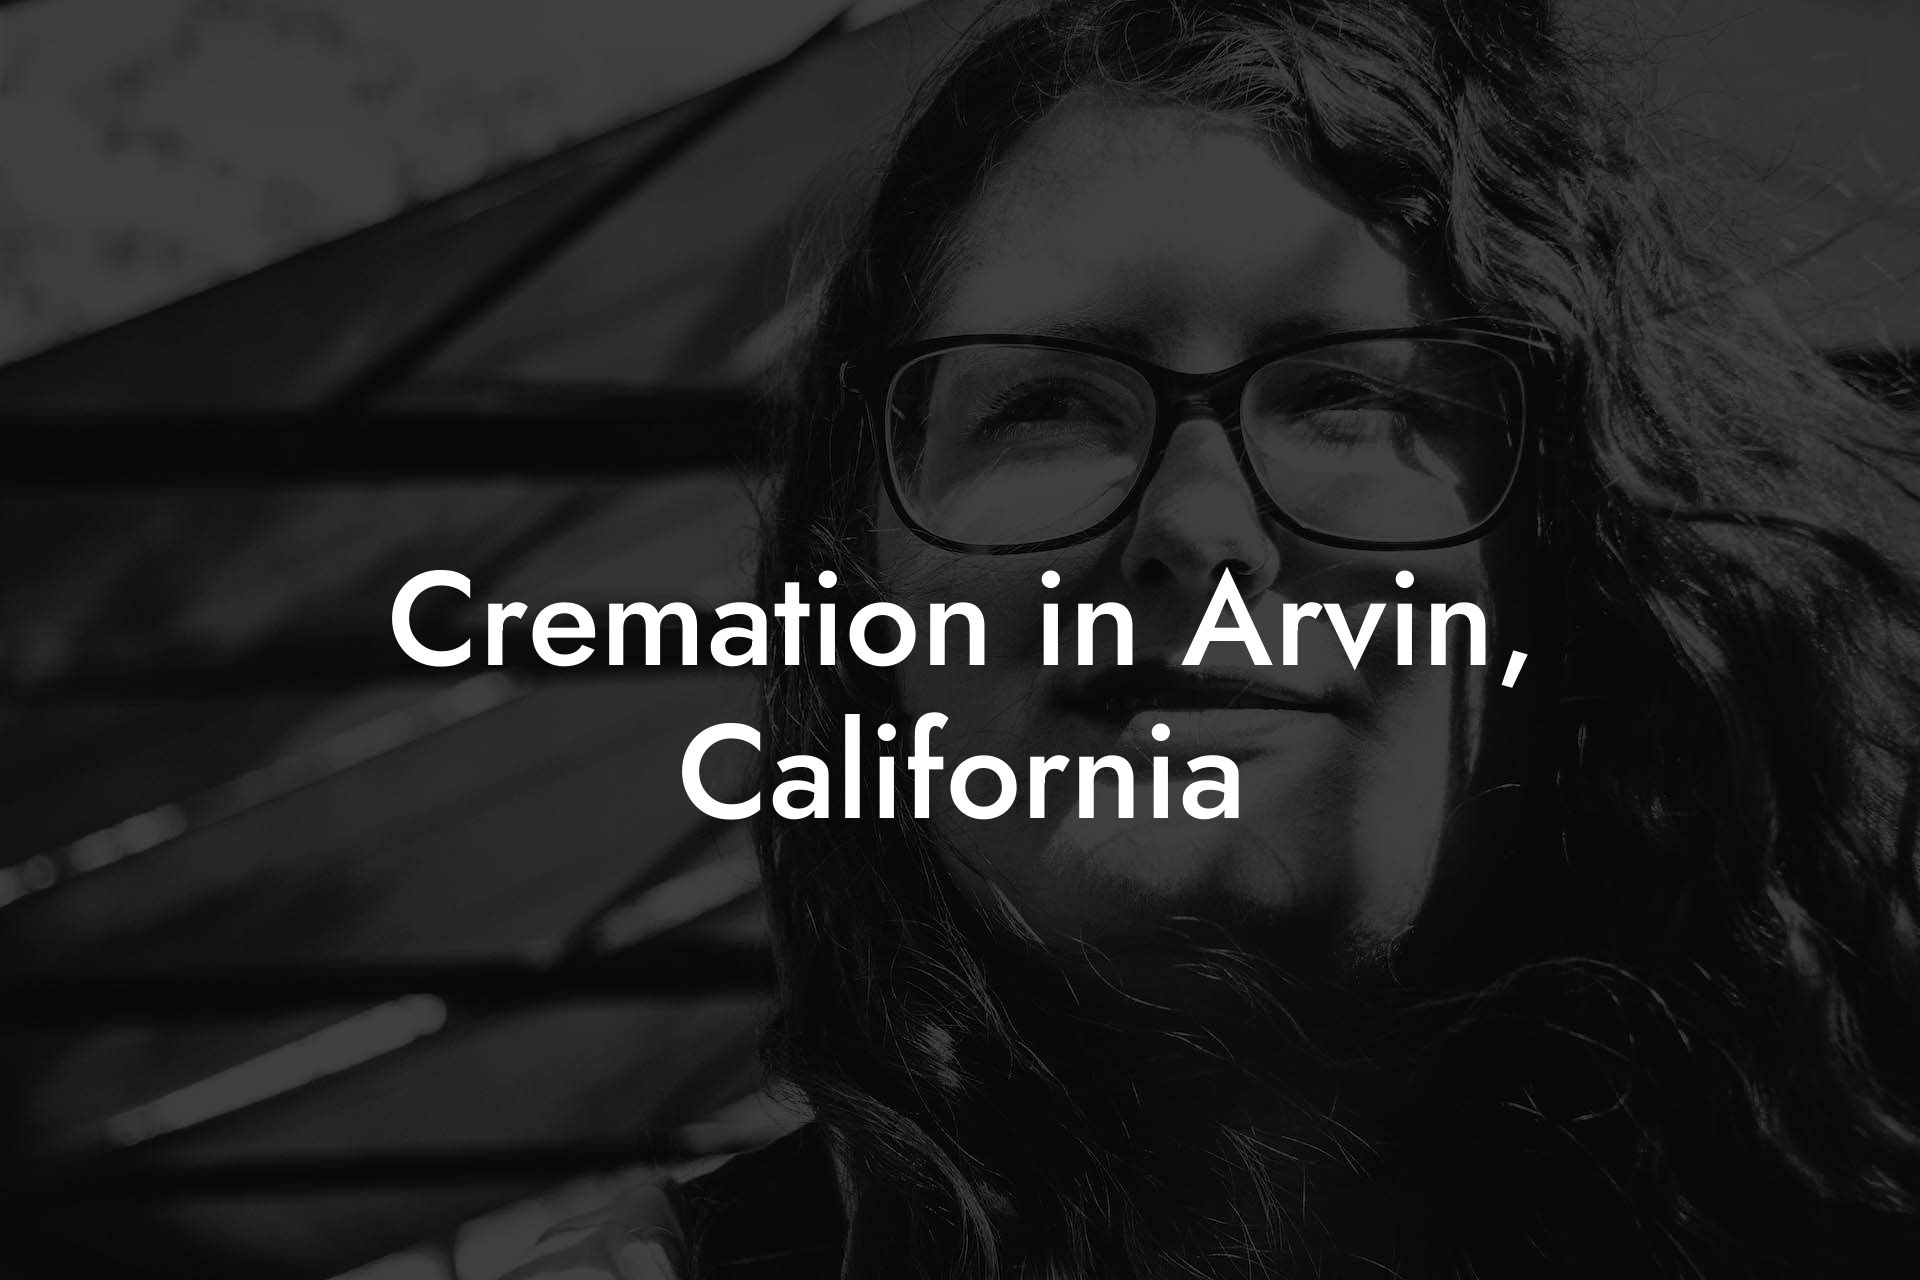 Cremation in Arvin, California